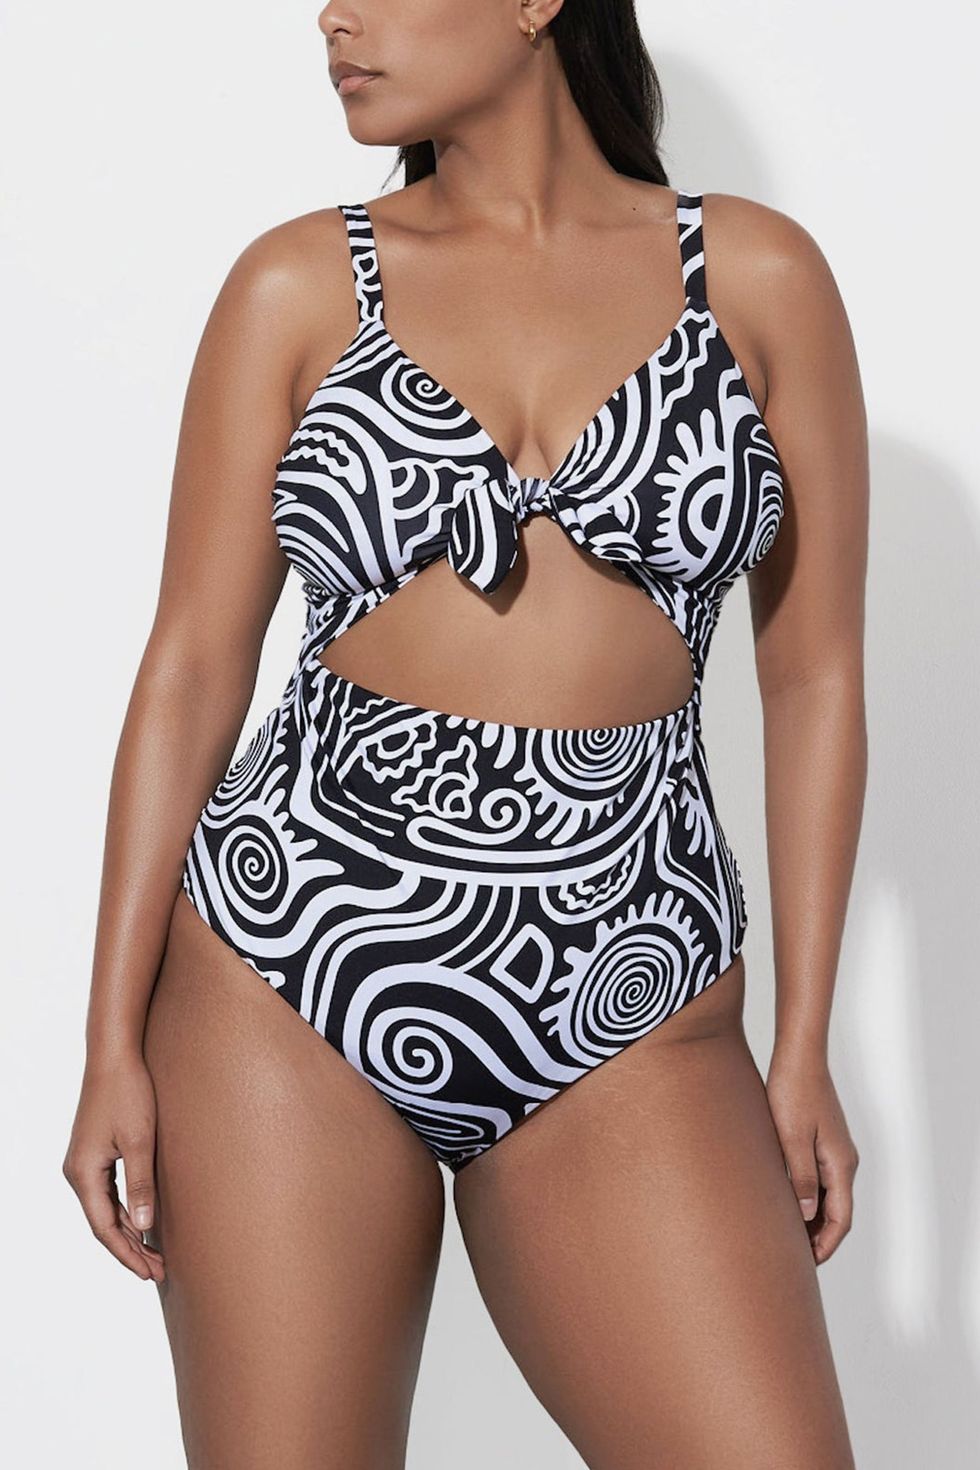 Women's Plus Size Printed Sexy Backless One-Piece Swimsuit Bathing Suit  Swimmwear one-piece swimsuit 